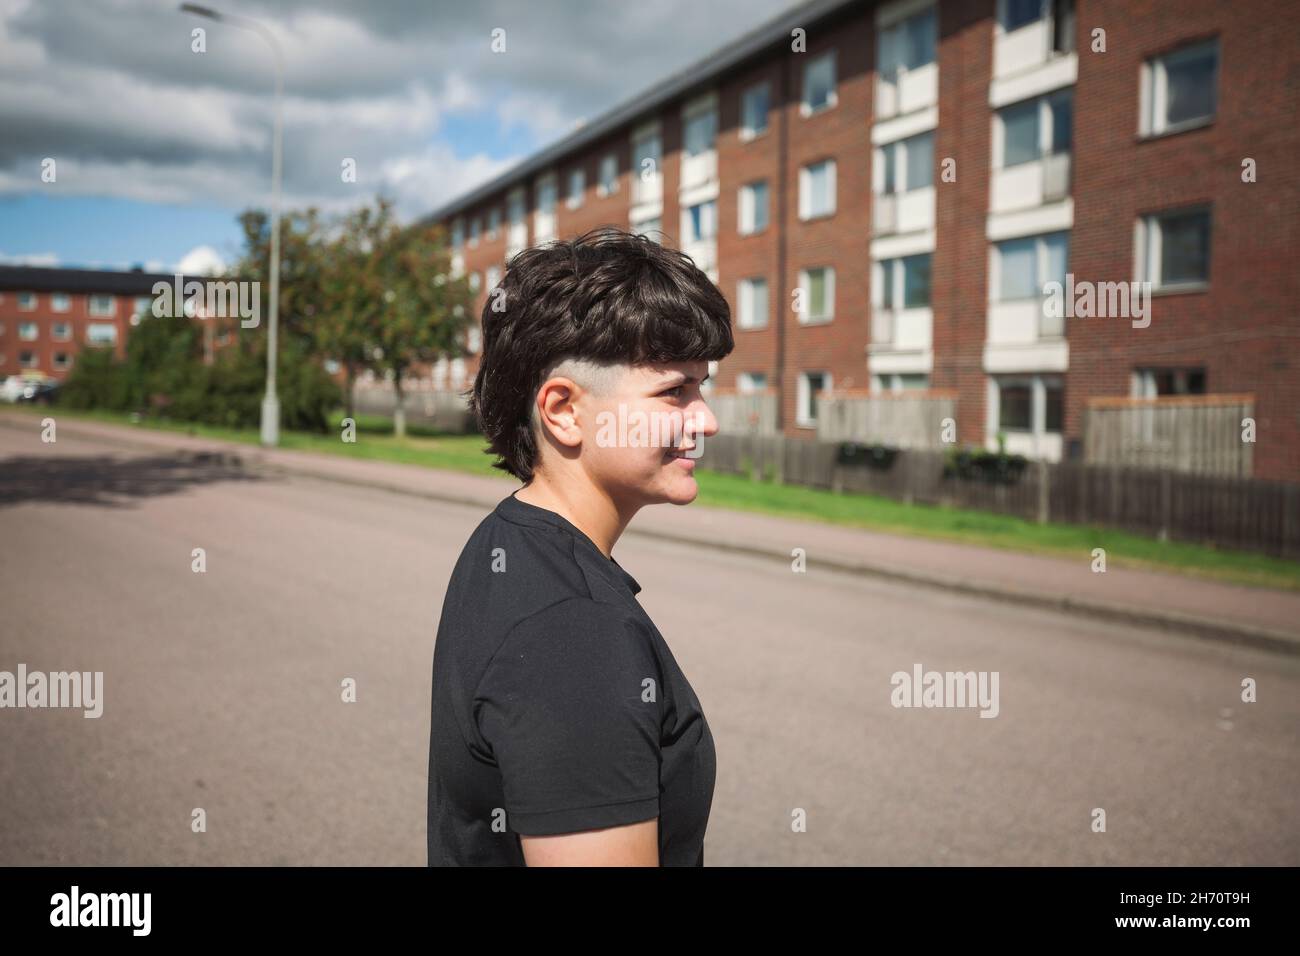 Young woman in residential district Stock Photo